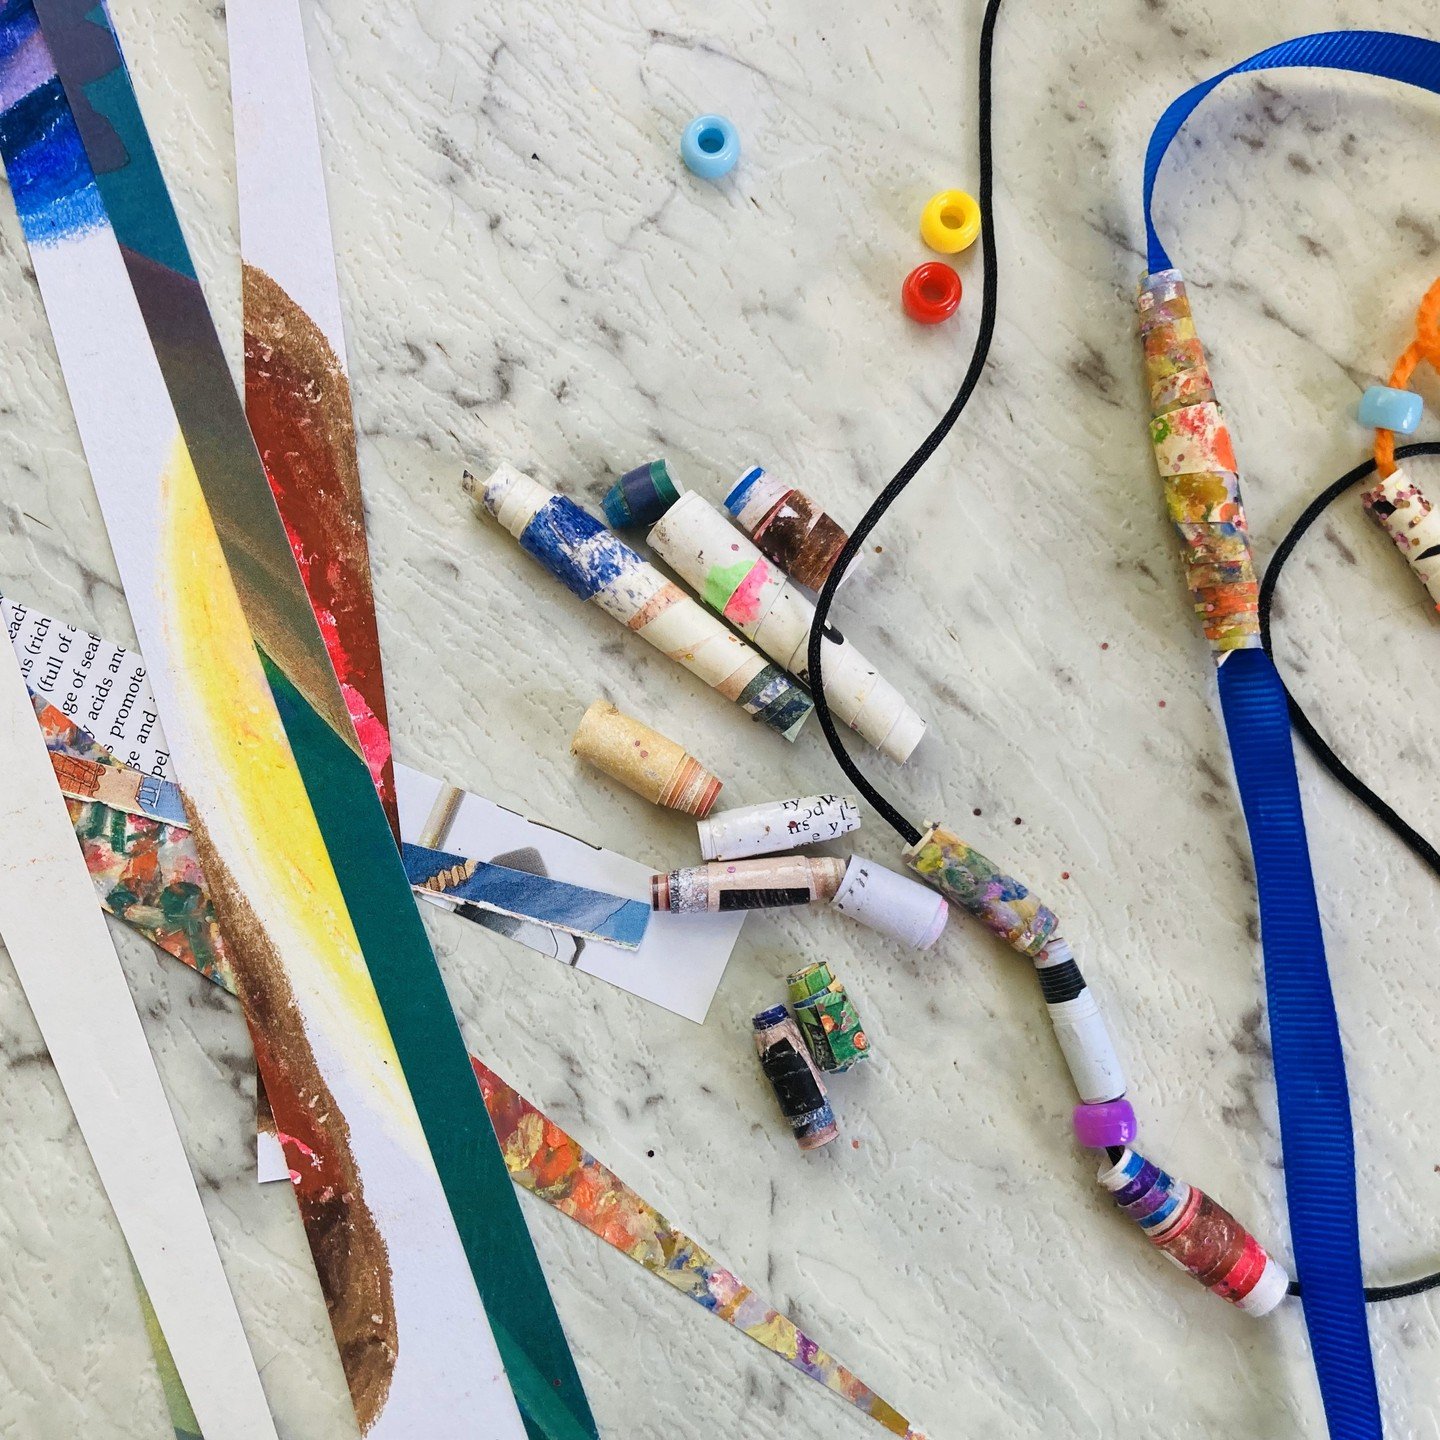 Let's roll!😉

Come along to Get Crafty: Recycled Paper Beads!

Date: Tuesday 18th June
Time: 5:30-7:30pm
Cost: Free
Age: Adults 16+
Location: Hurstville Library

Register via link in my bio

Mary-Helen

#recycledart #paperbeads #paperbeadsjewellery 